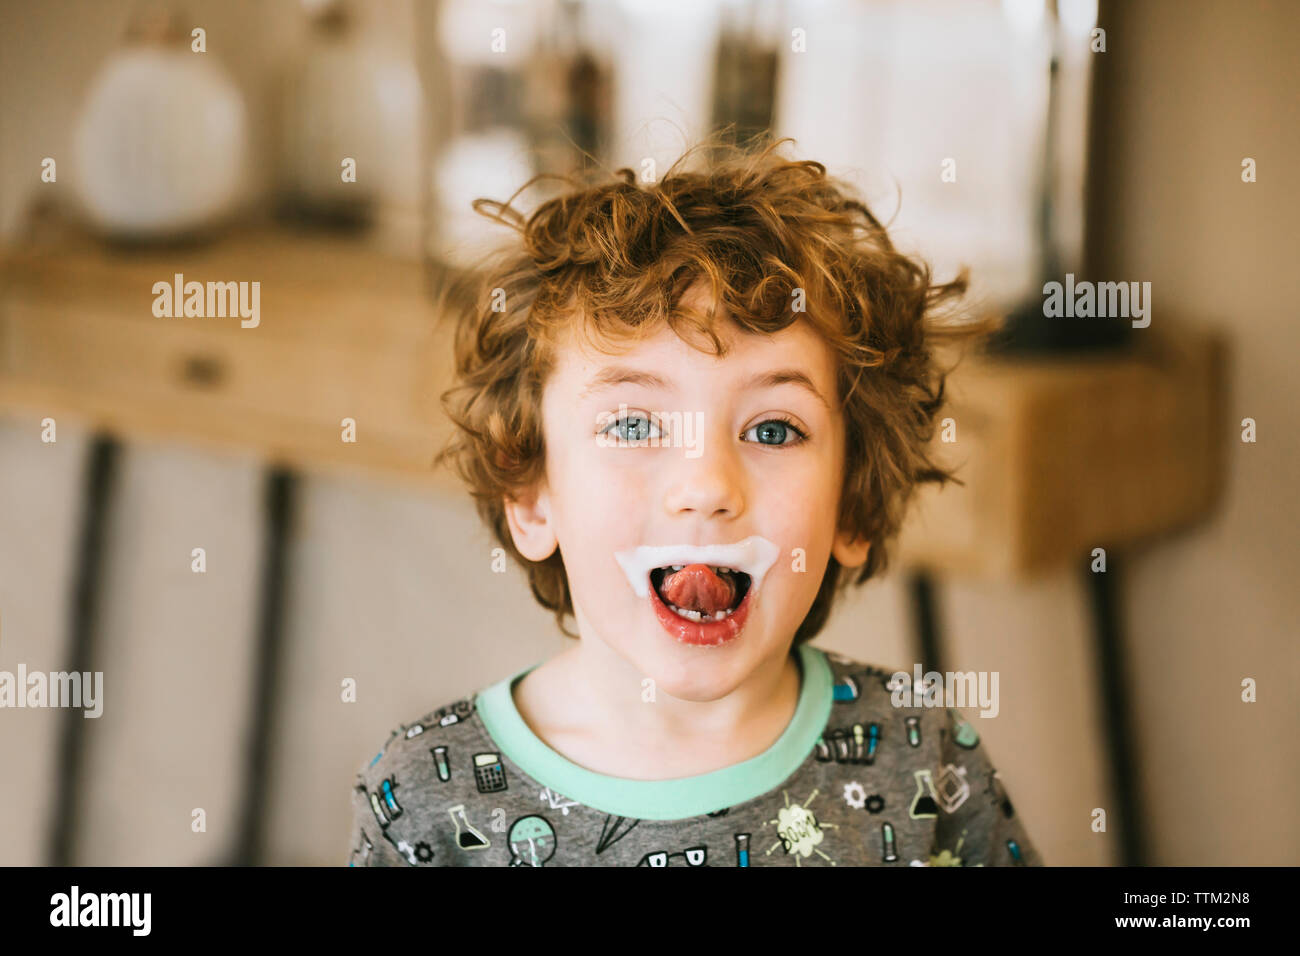 Portrait of cute boy with milk mustache sticking out tongue at home Stock Photo